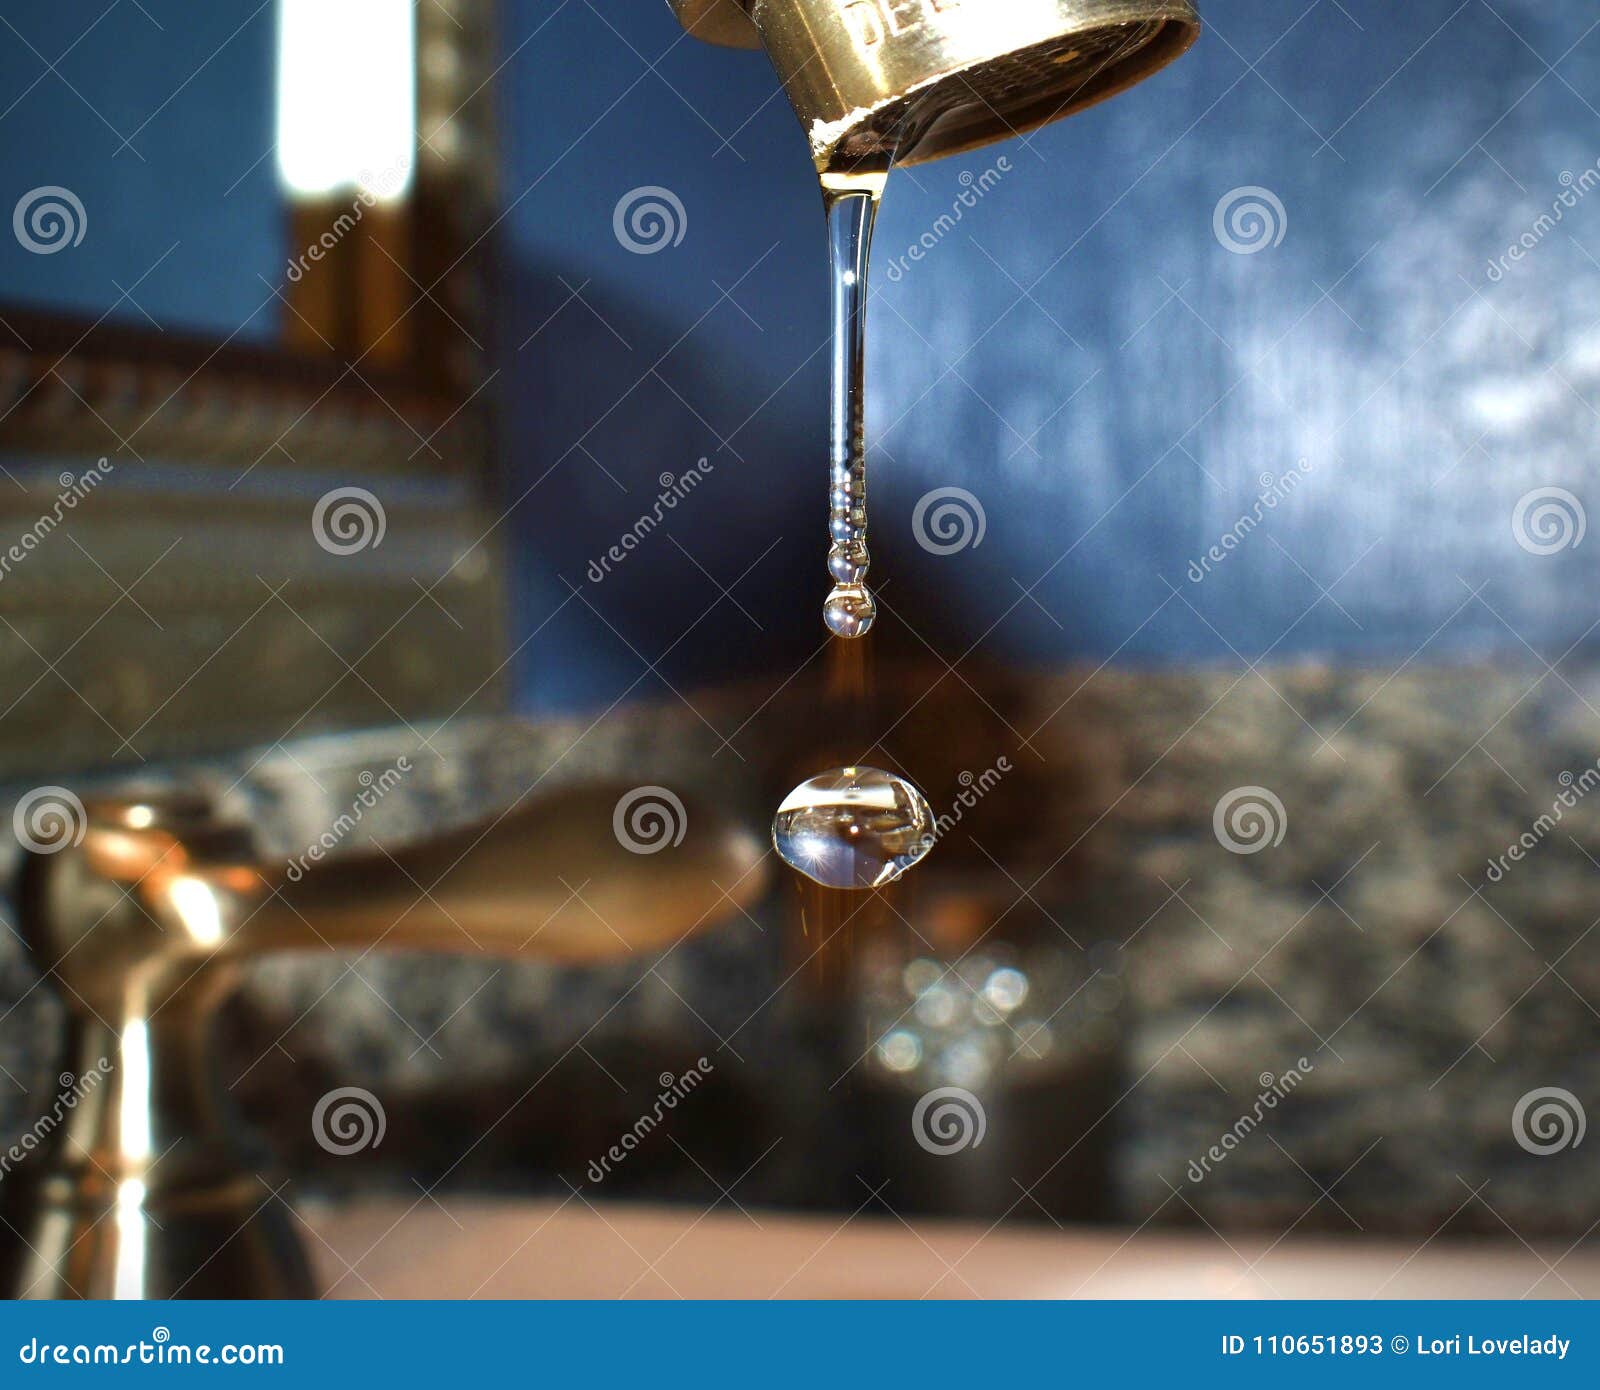 Crystal Clear Water Drops Caught Frozen In Mid Air Stock Image